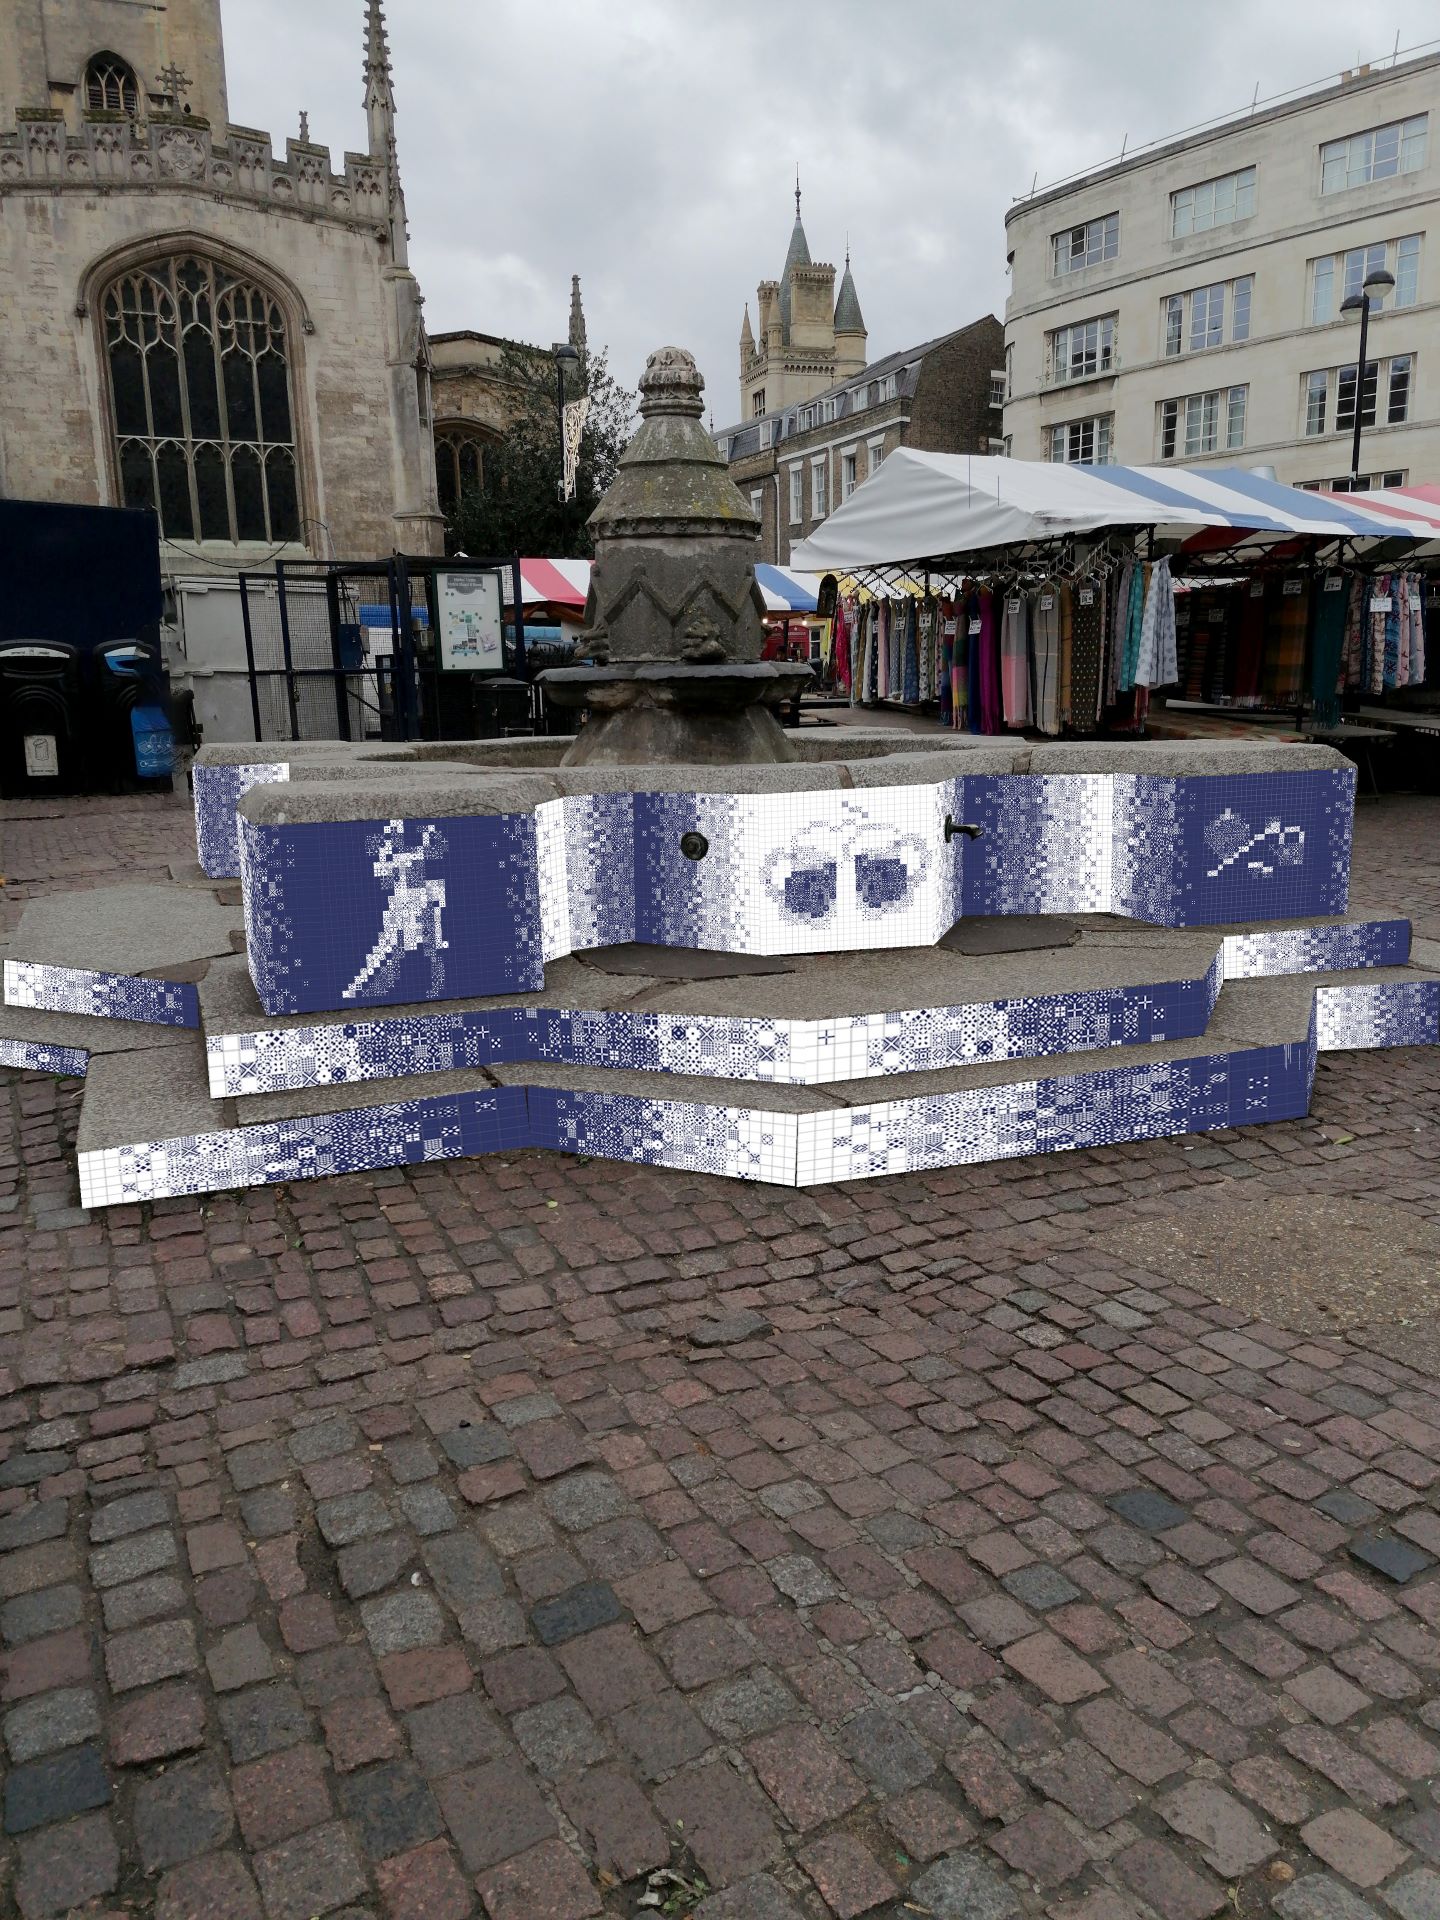 Cambridge Market Place fountain. This is how it might look, the fountain I want to enhance with my designs using the Portuguese tile-making.